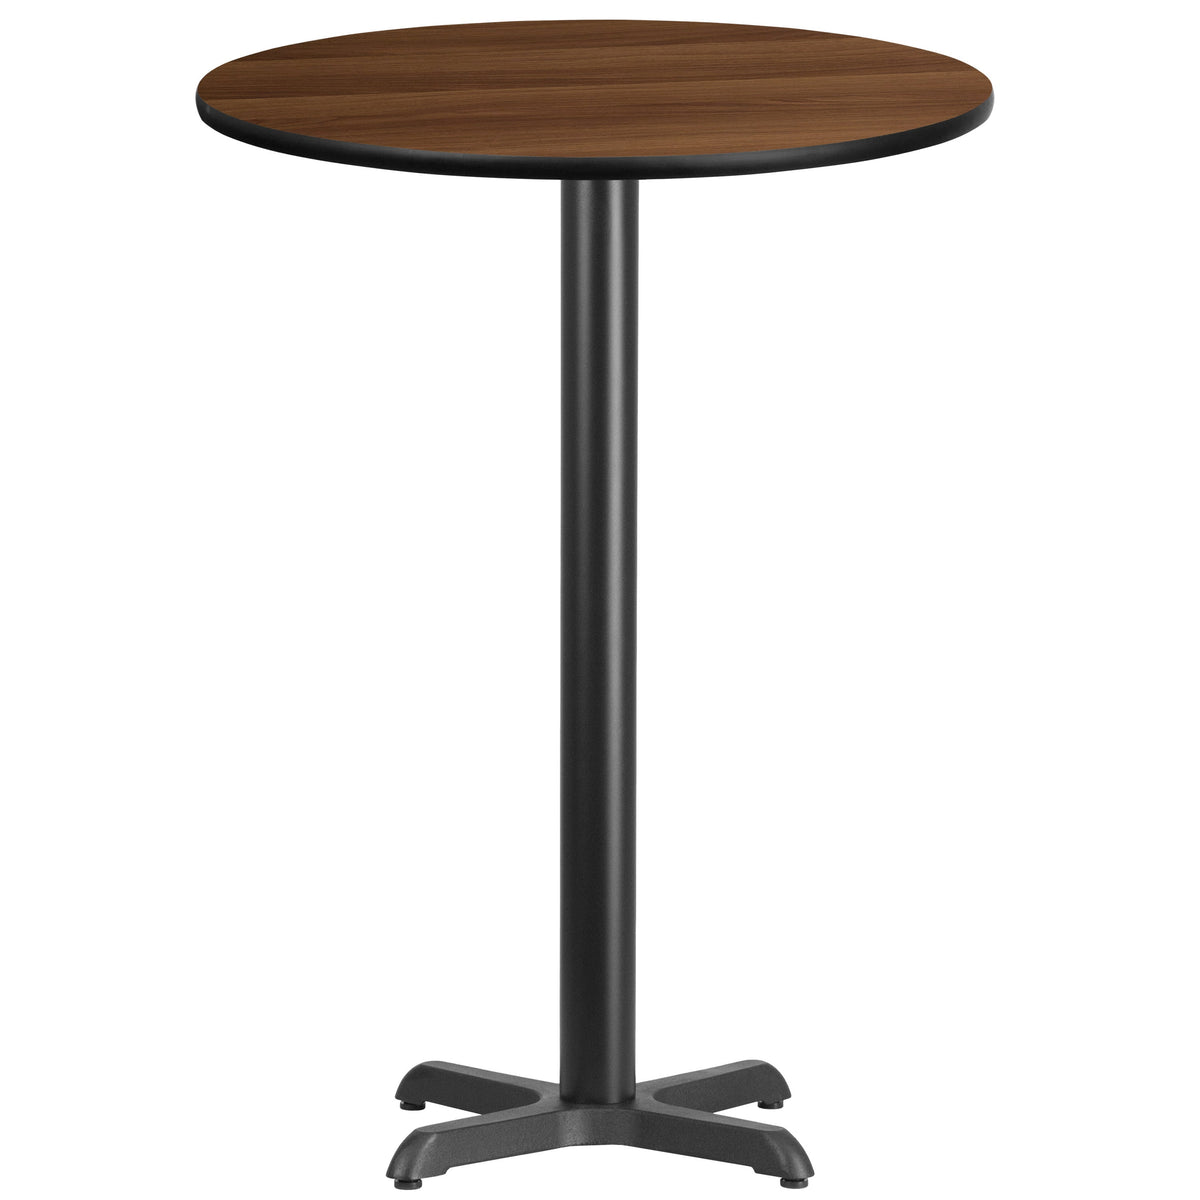 Walnut |#| 30inch Round Walnut Laminate Table Top with 22inch x 22inch Bar Height Table Base